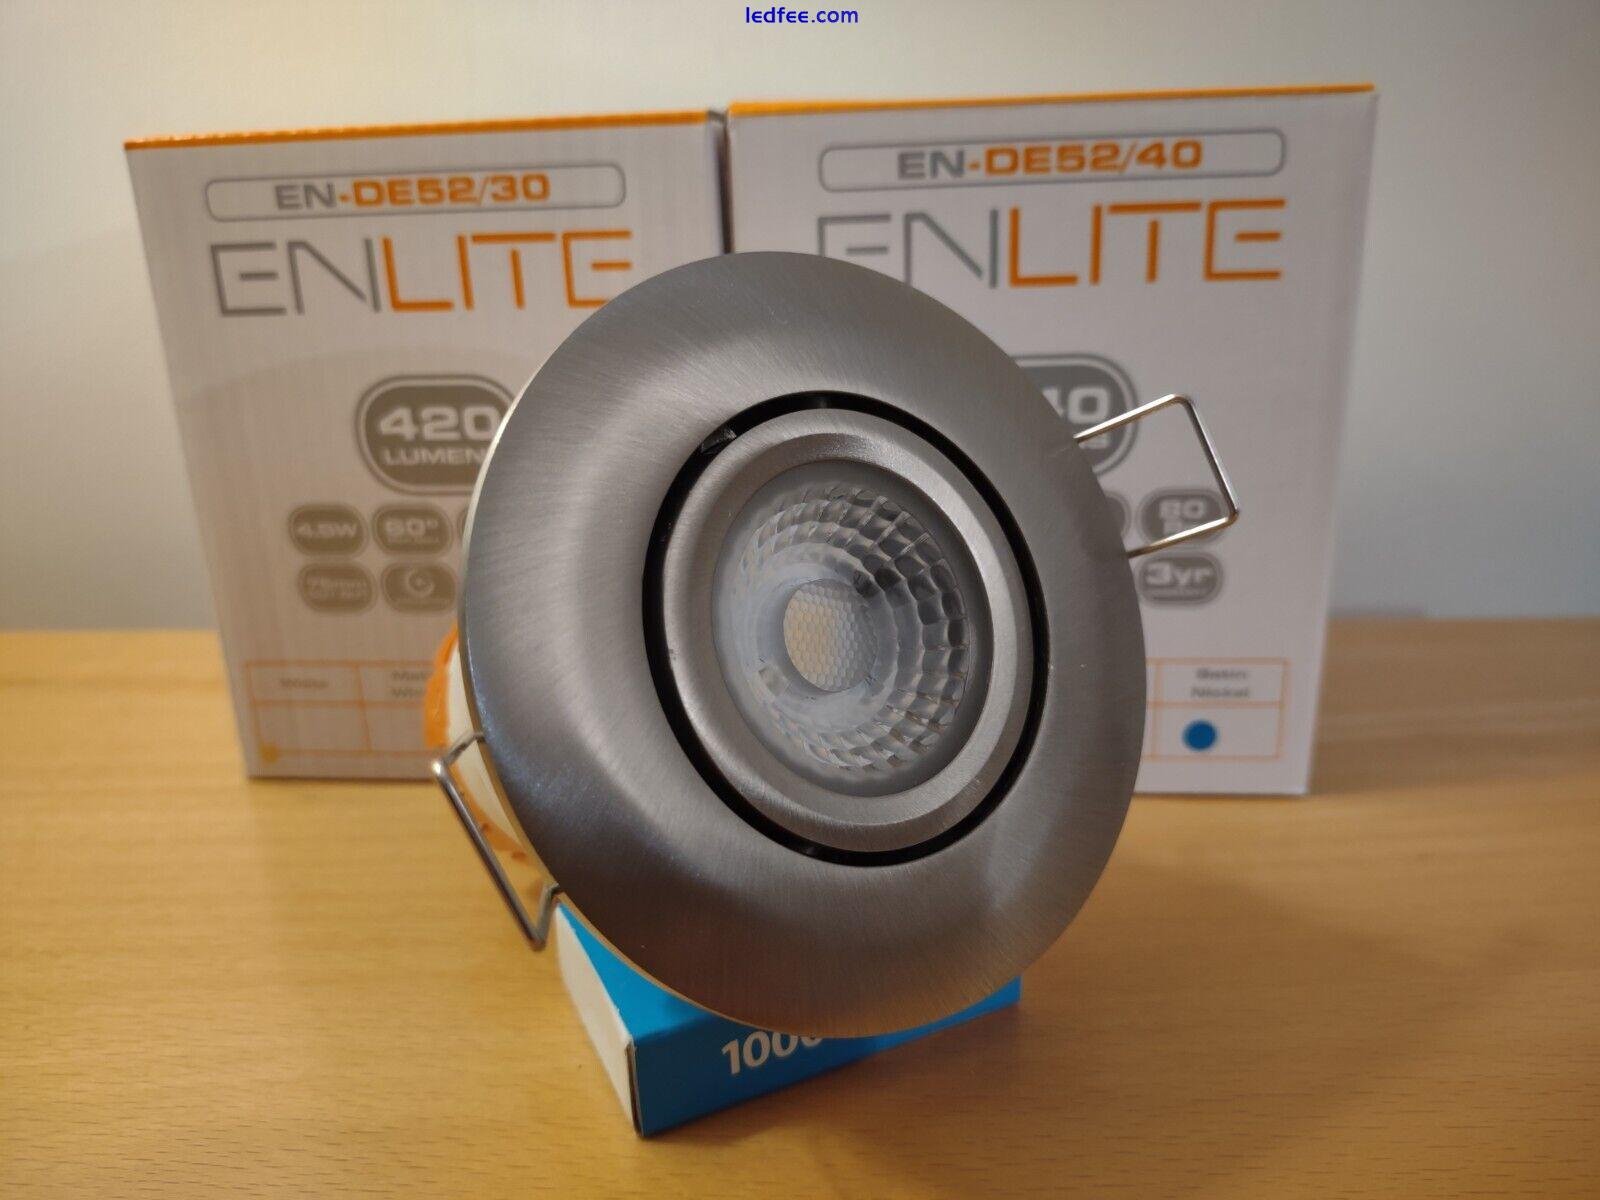 LED Downlight Enlite 4 . 5w Nickel 3000k Warm White Ceiling Spot Fire Rated 1 